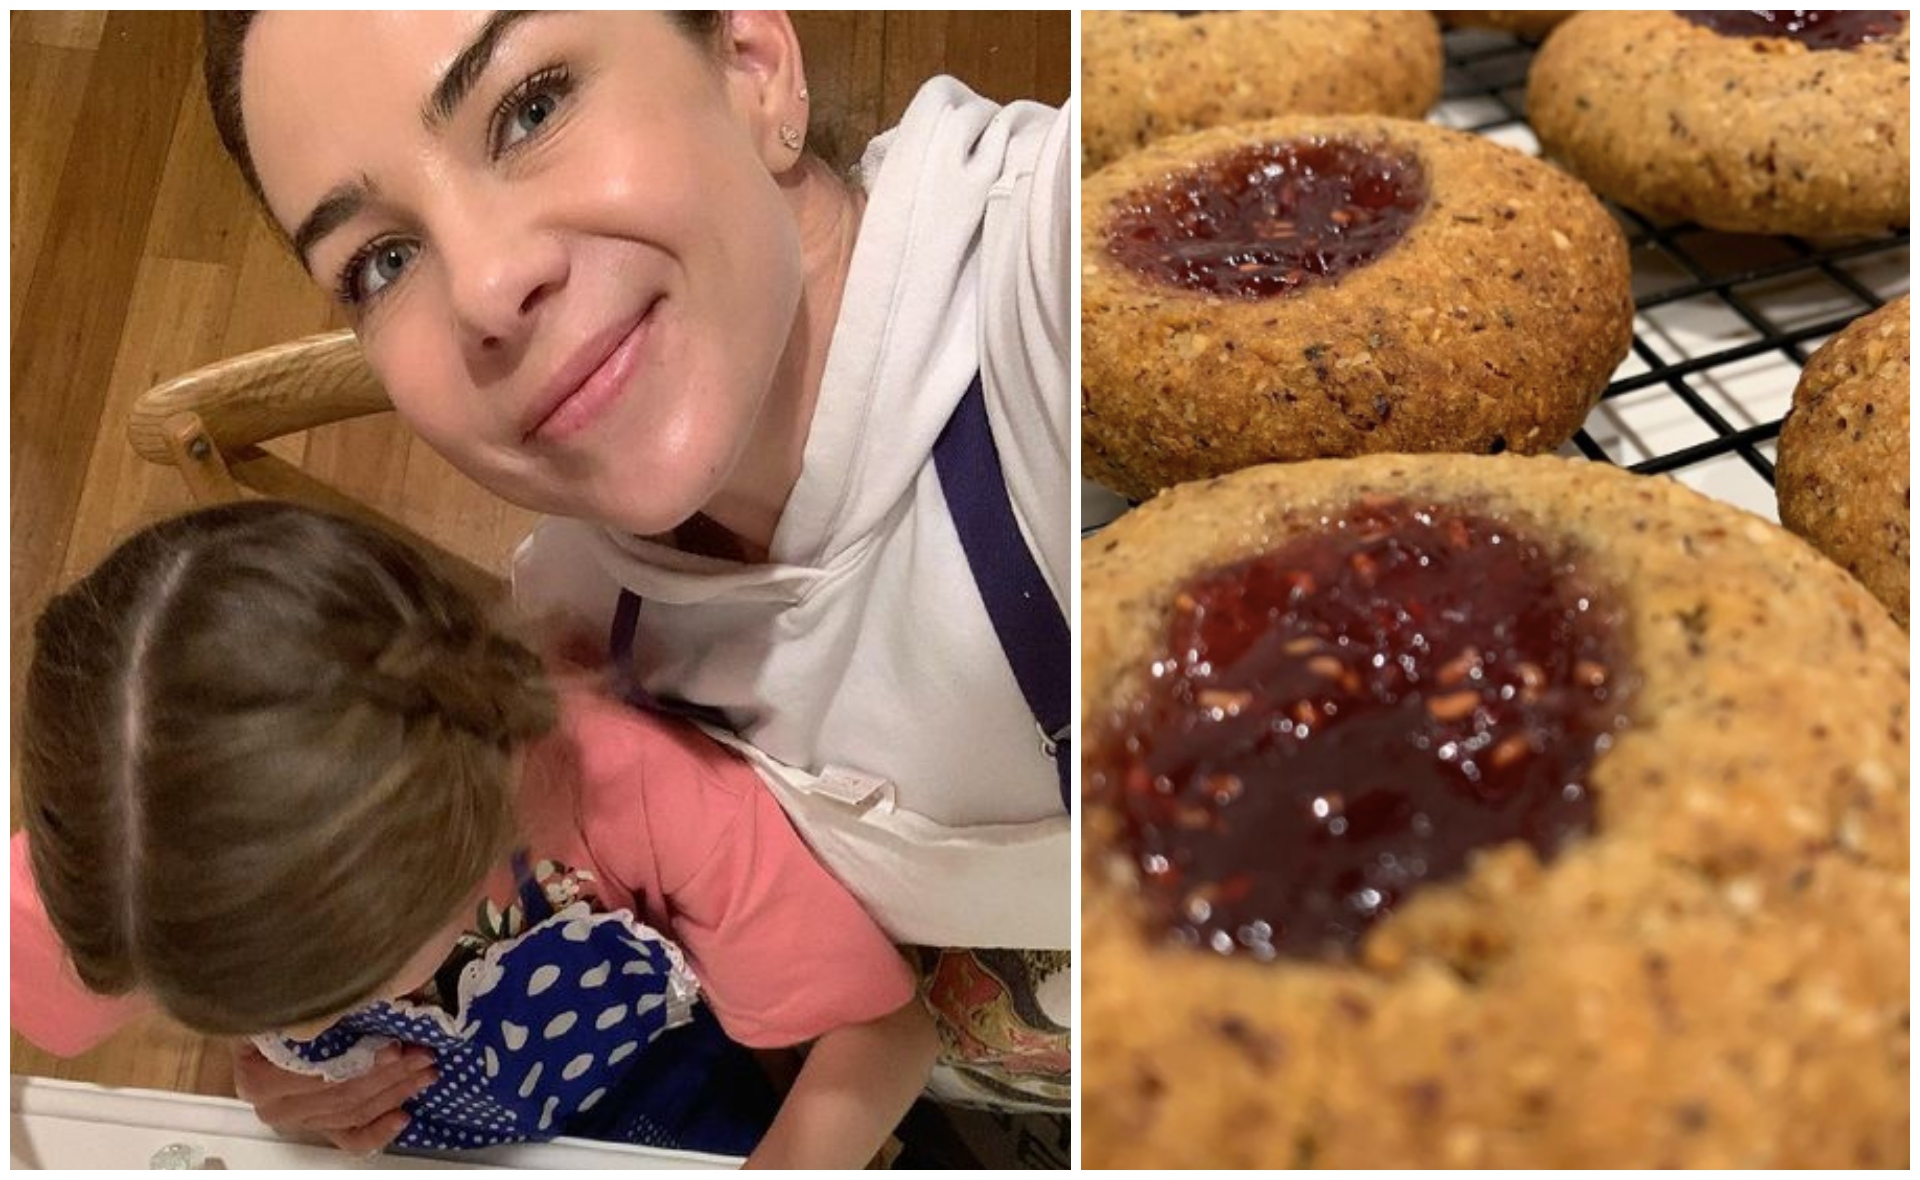 Kate Ritchie’s lockdown activities included the sweetest baking date with daughter Mae